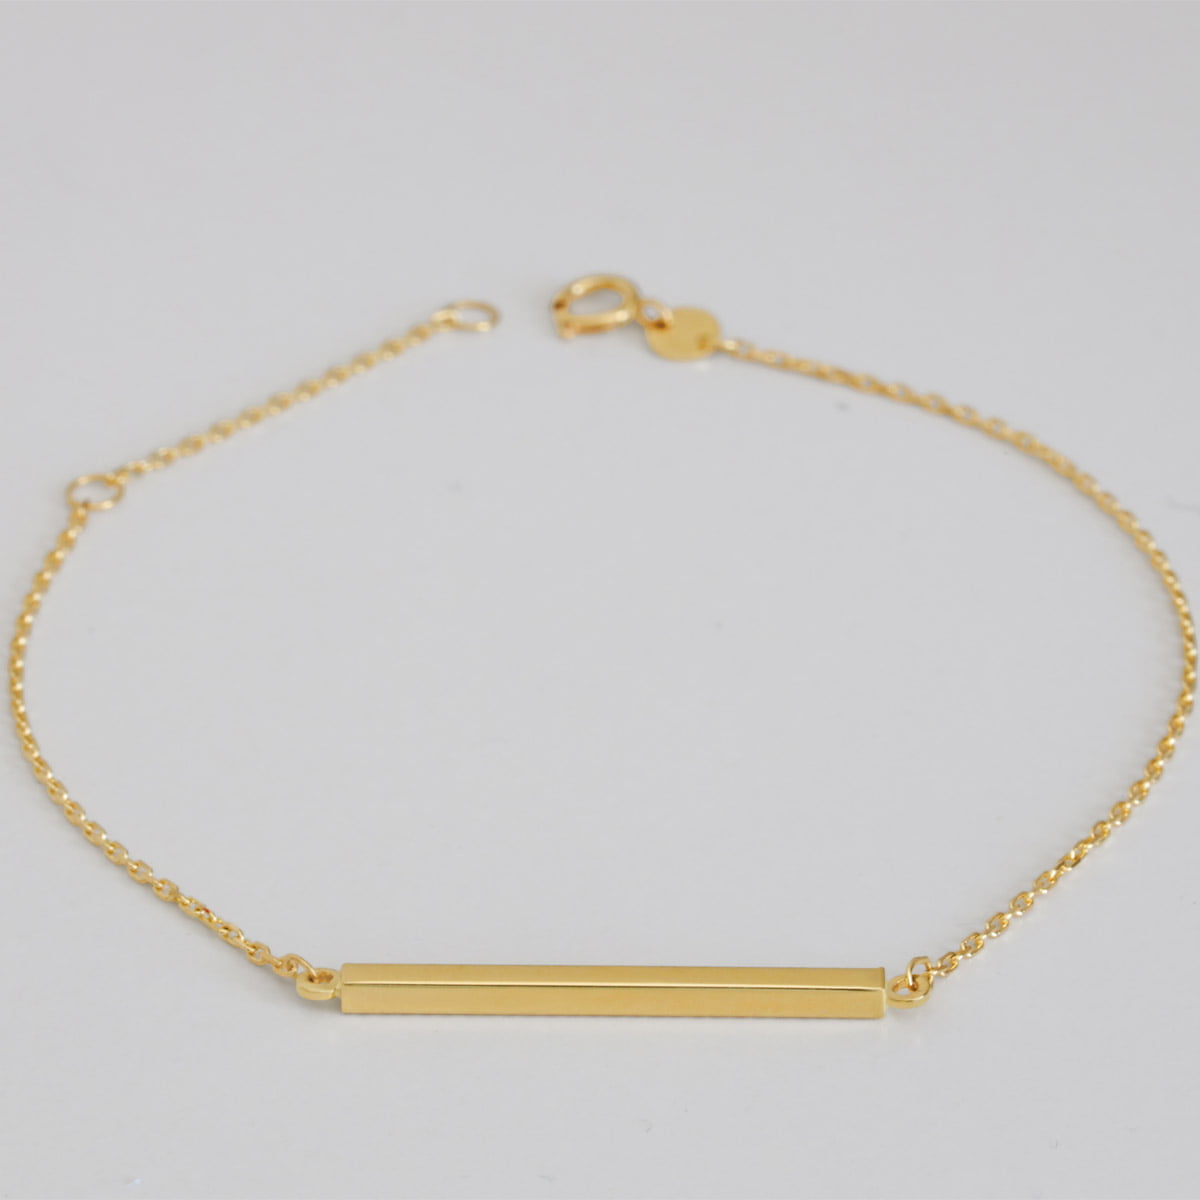 18ct Solid Gold Chain T Bar Bracelet for women